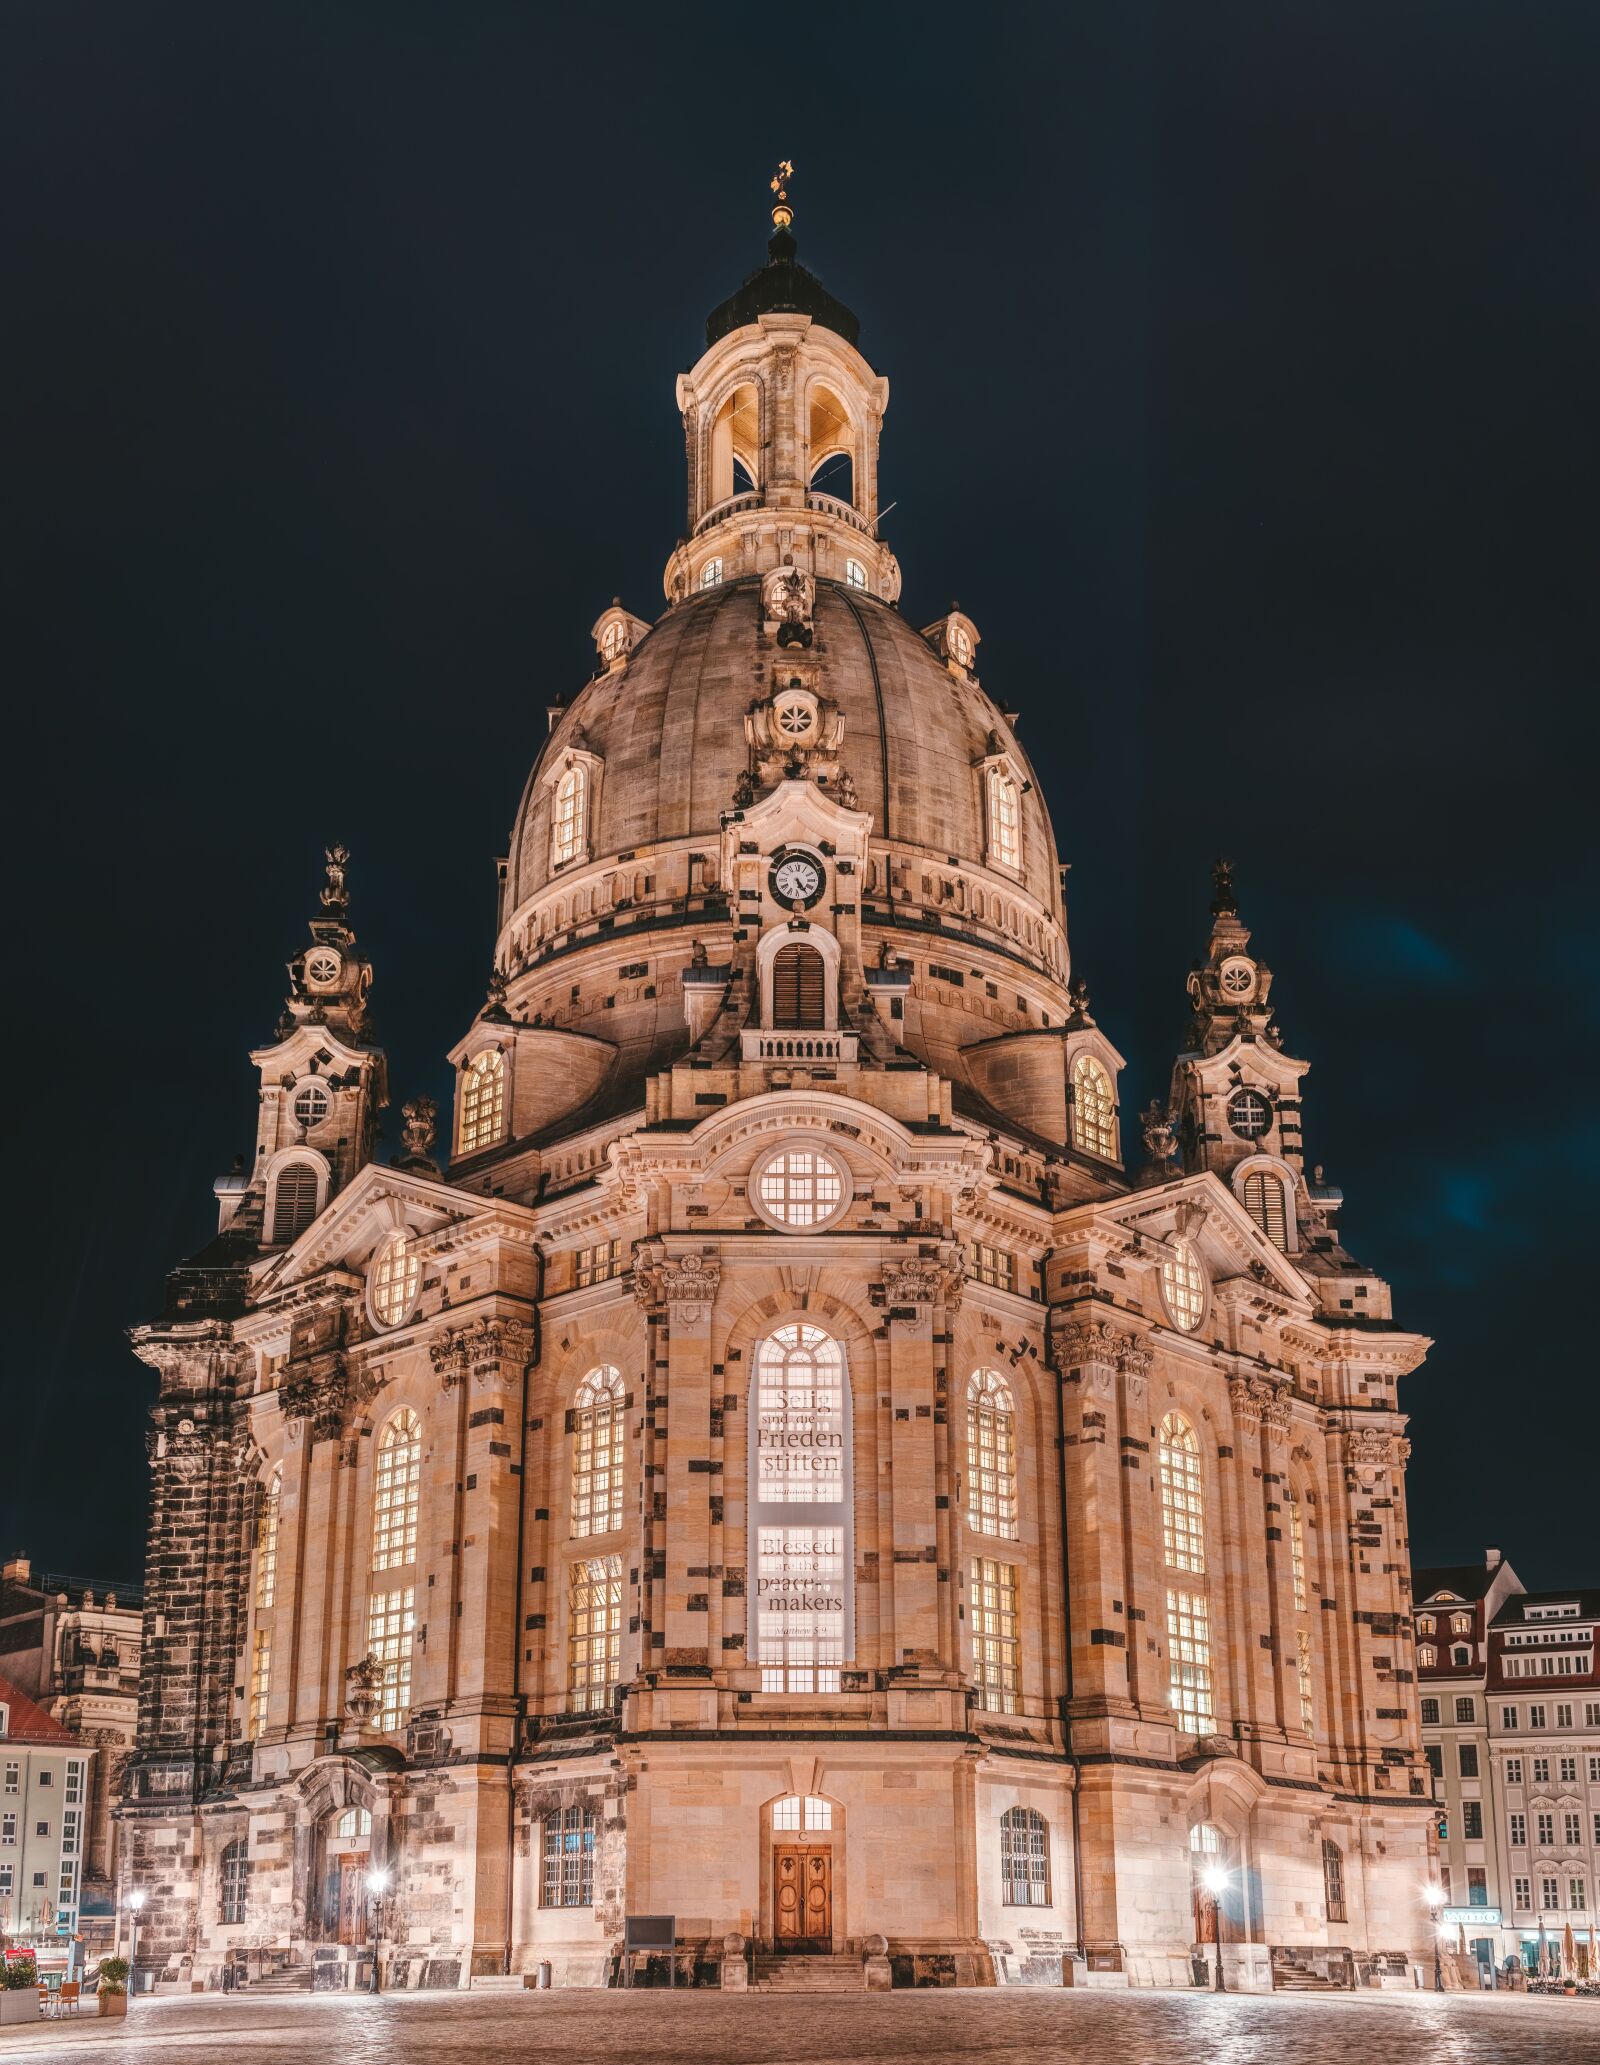 Sony a6300 sample photo. Frauenkirche, dresden, architecture photography